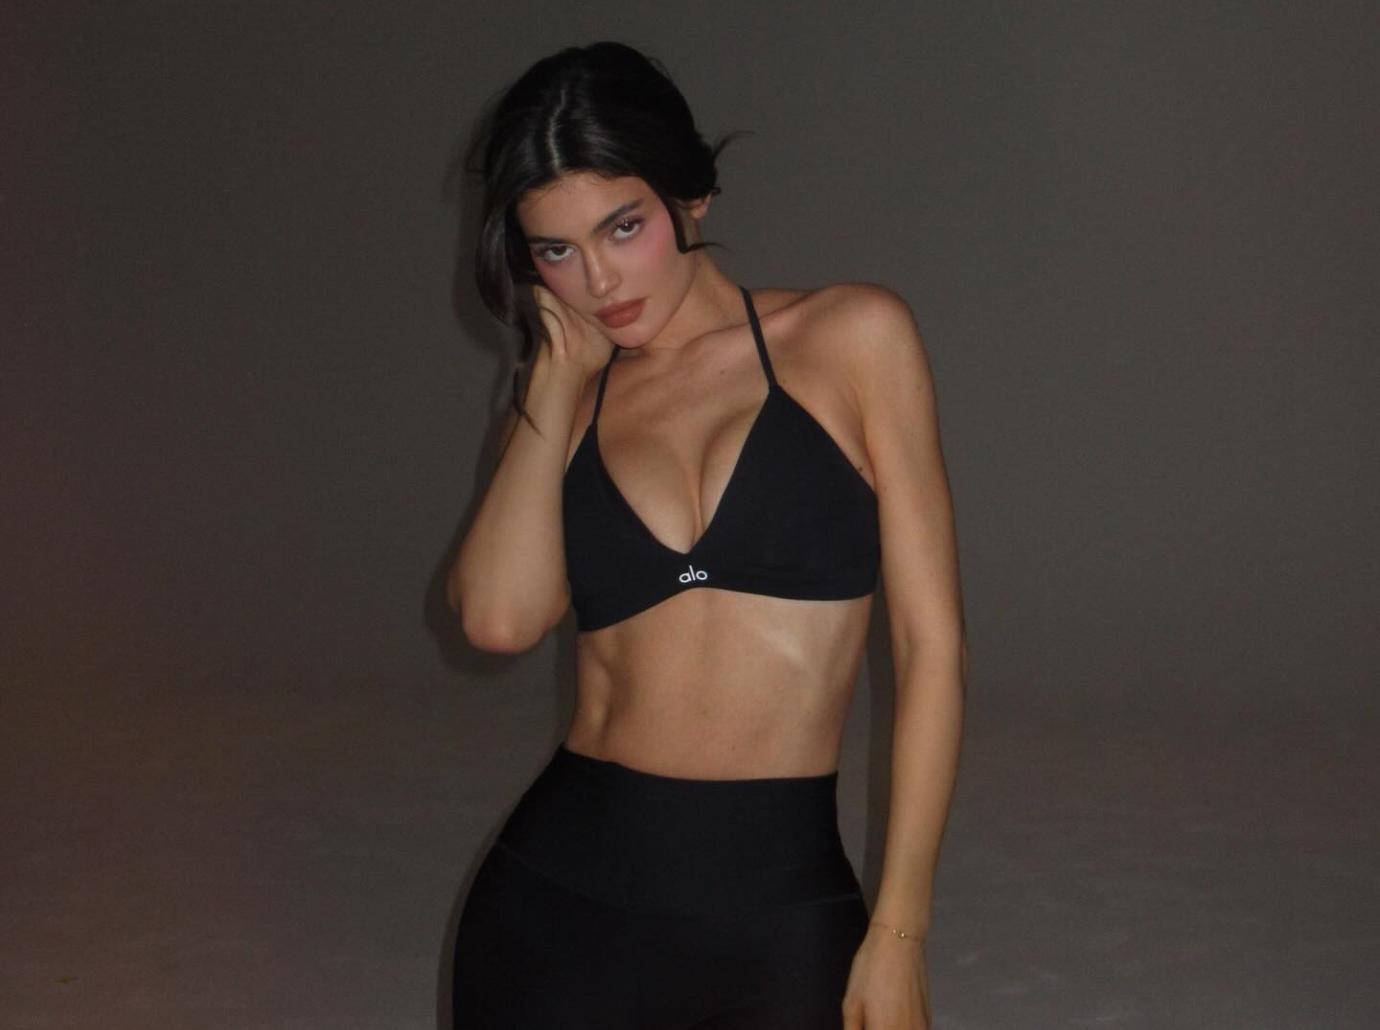 Kendall Jenner flashes incredible abs wearing Alo Yoga threads for